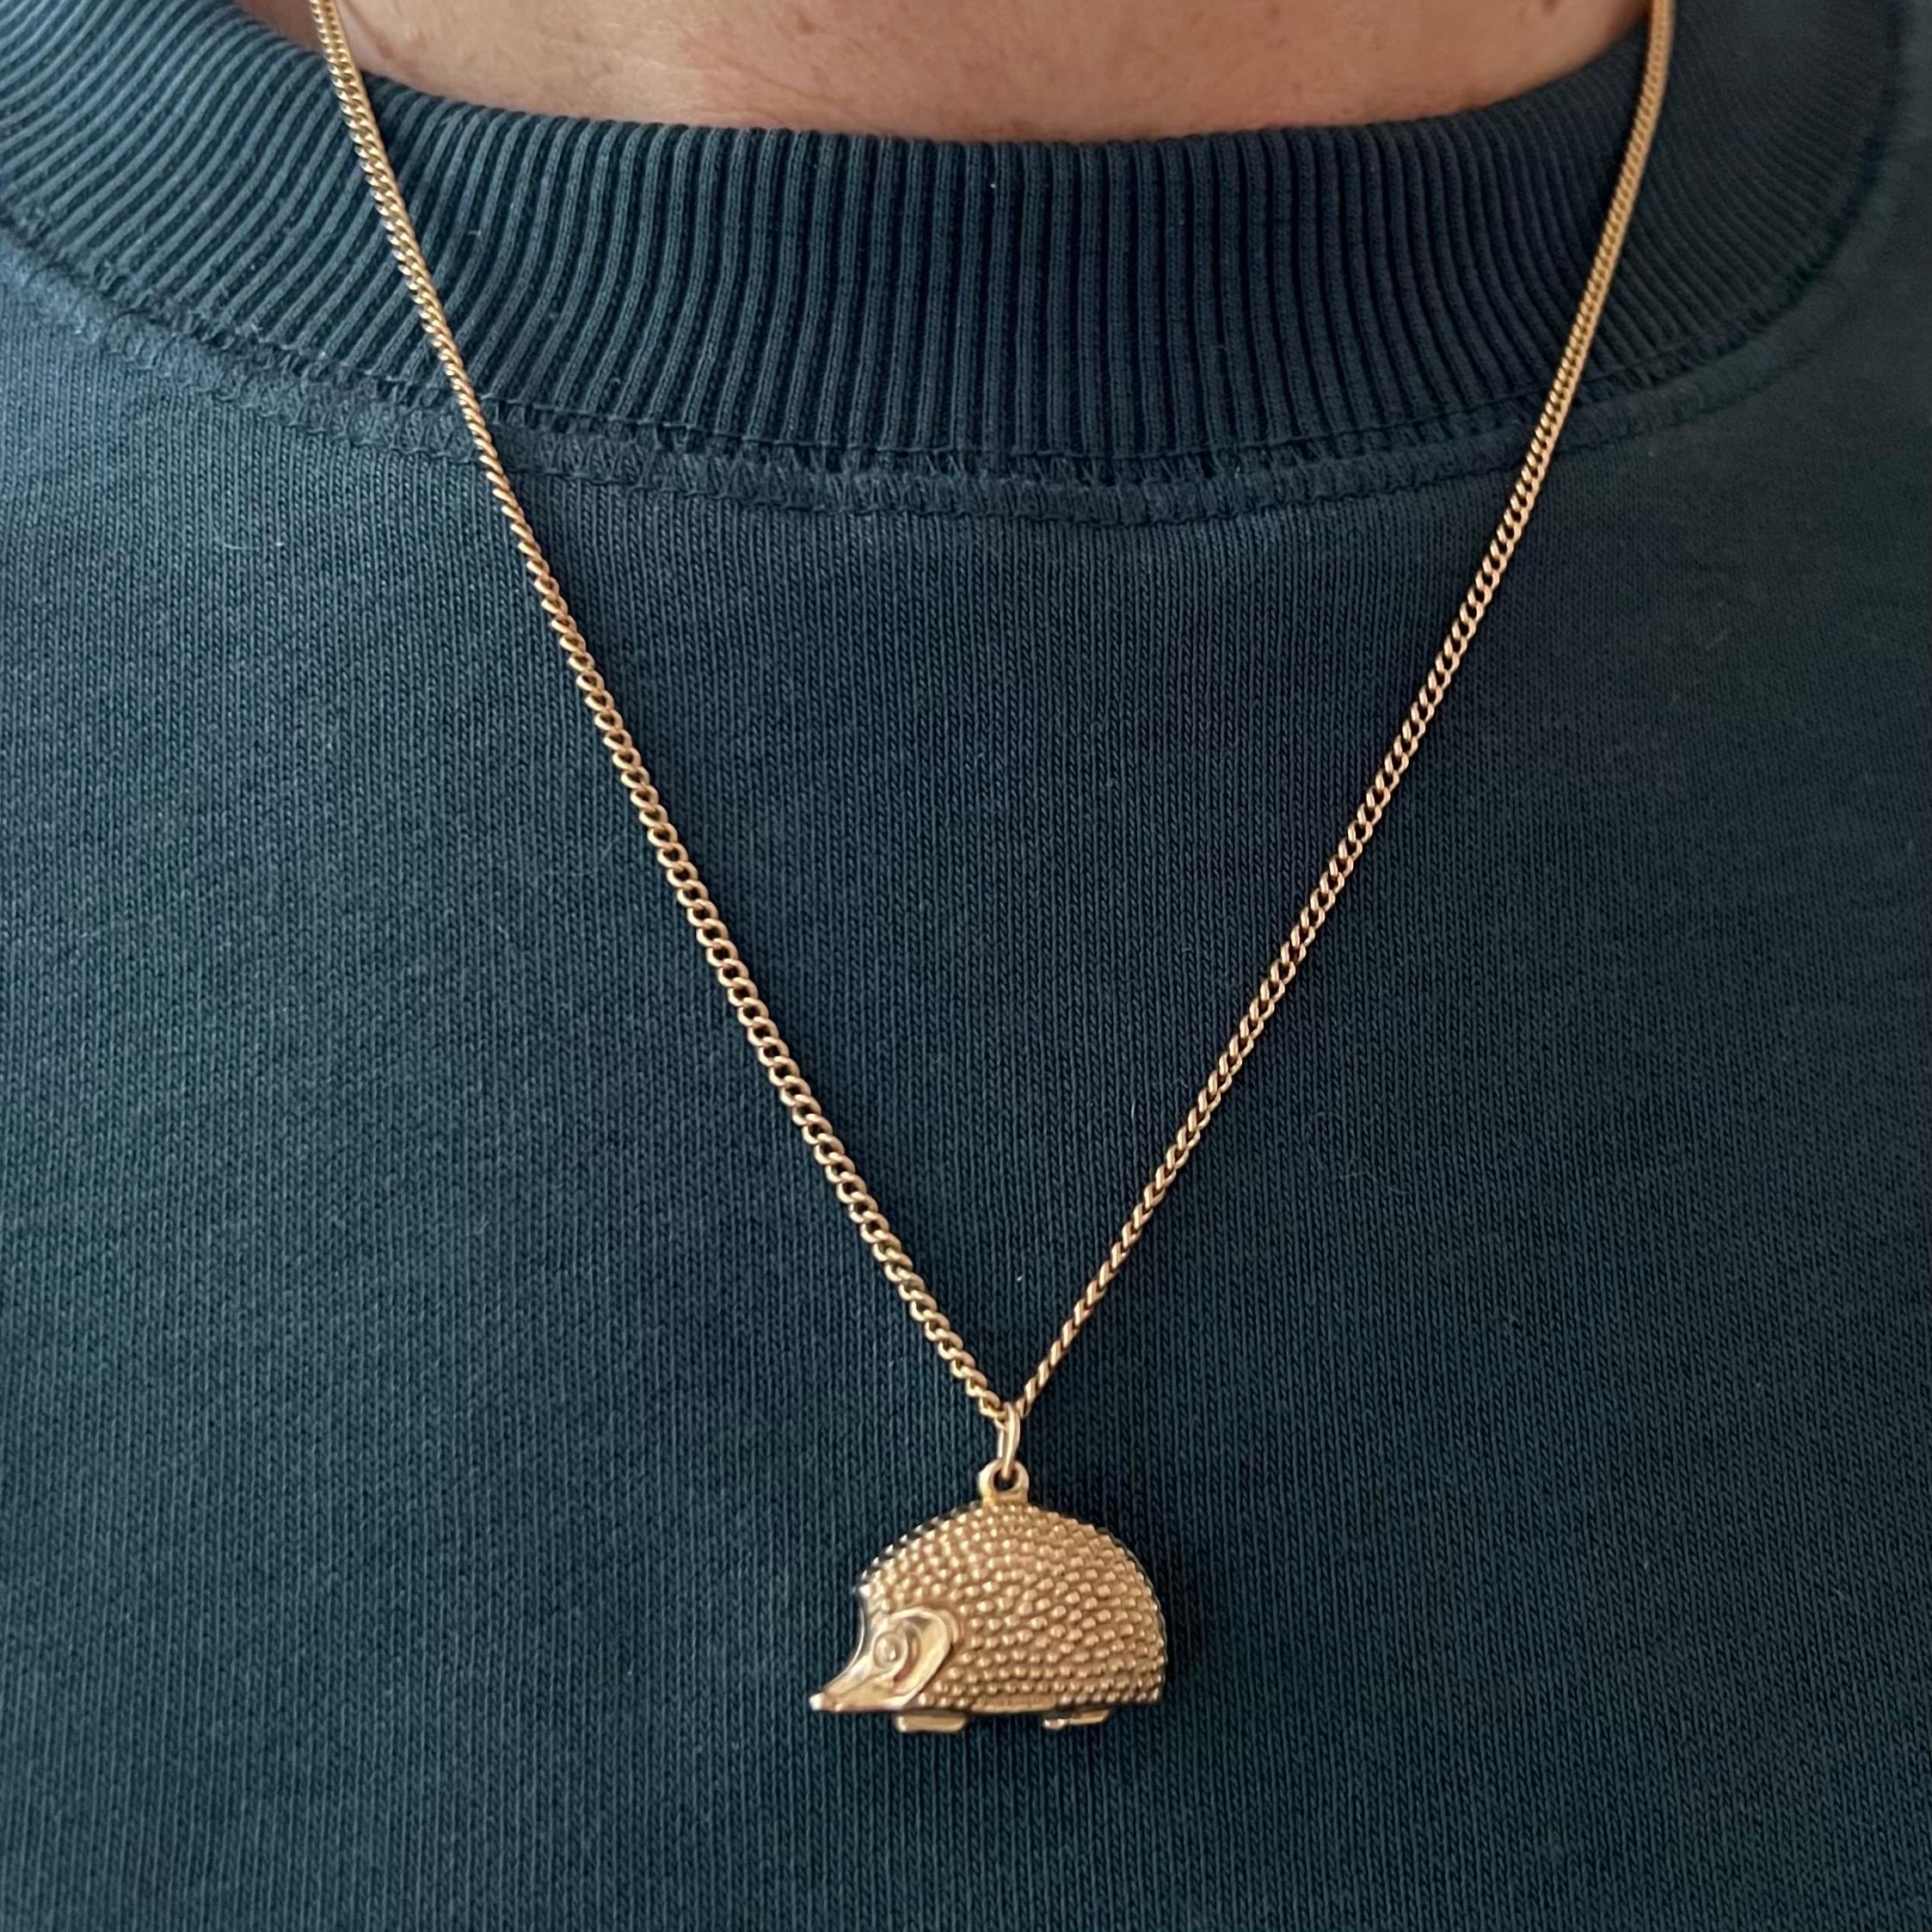 An adorable vintage 9 karat yellow gold hedgehog charm pendant. This hedgehog is beautifully detailed with its lovely sweet face and the granulated spines. 

In the spiritual realm, the hedgehog spirit animal symbolizes the importance of